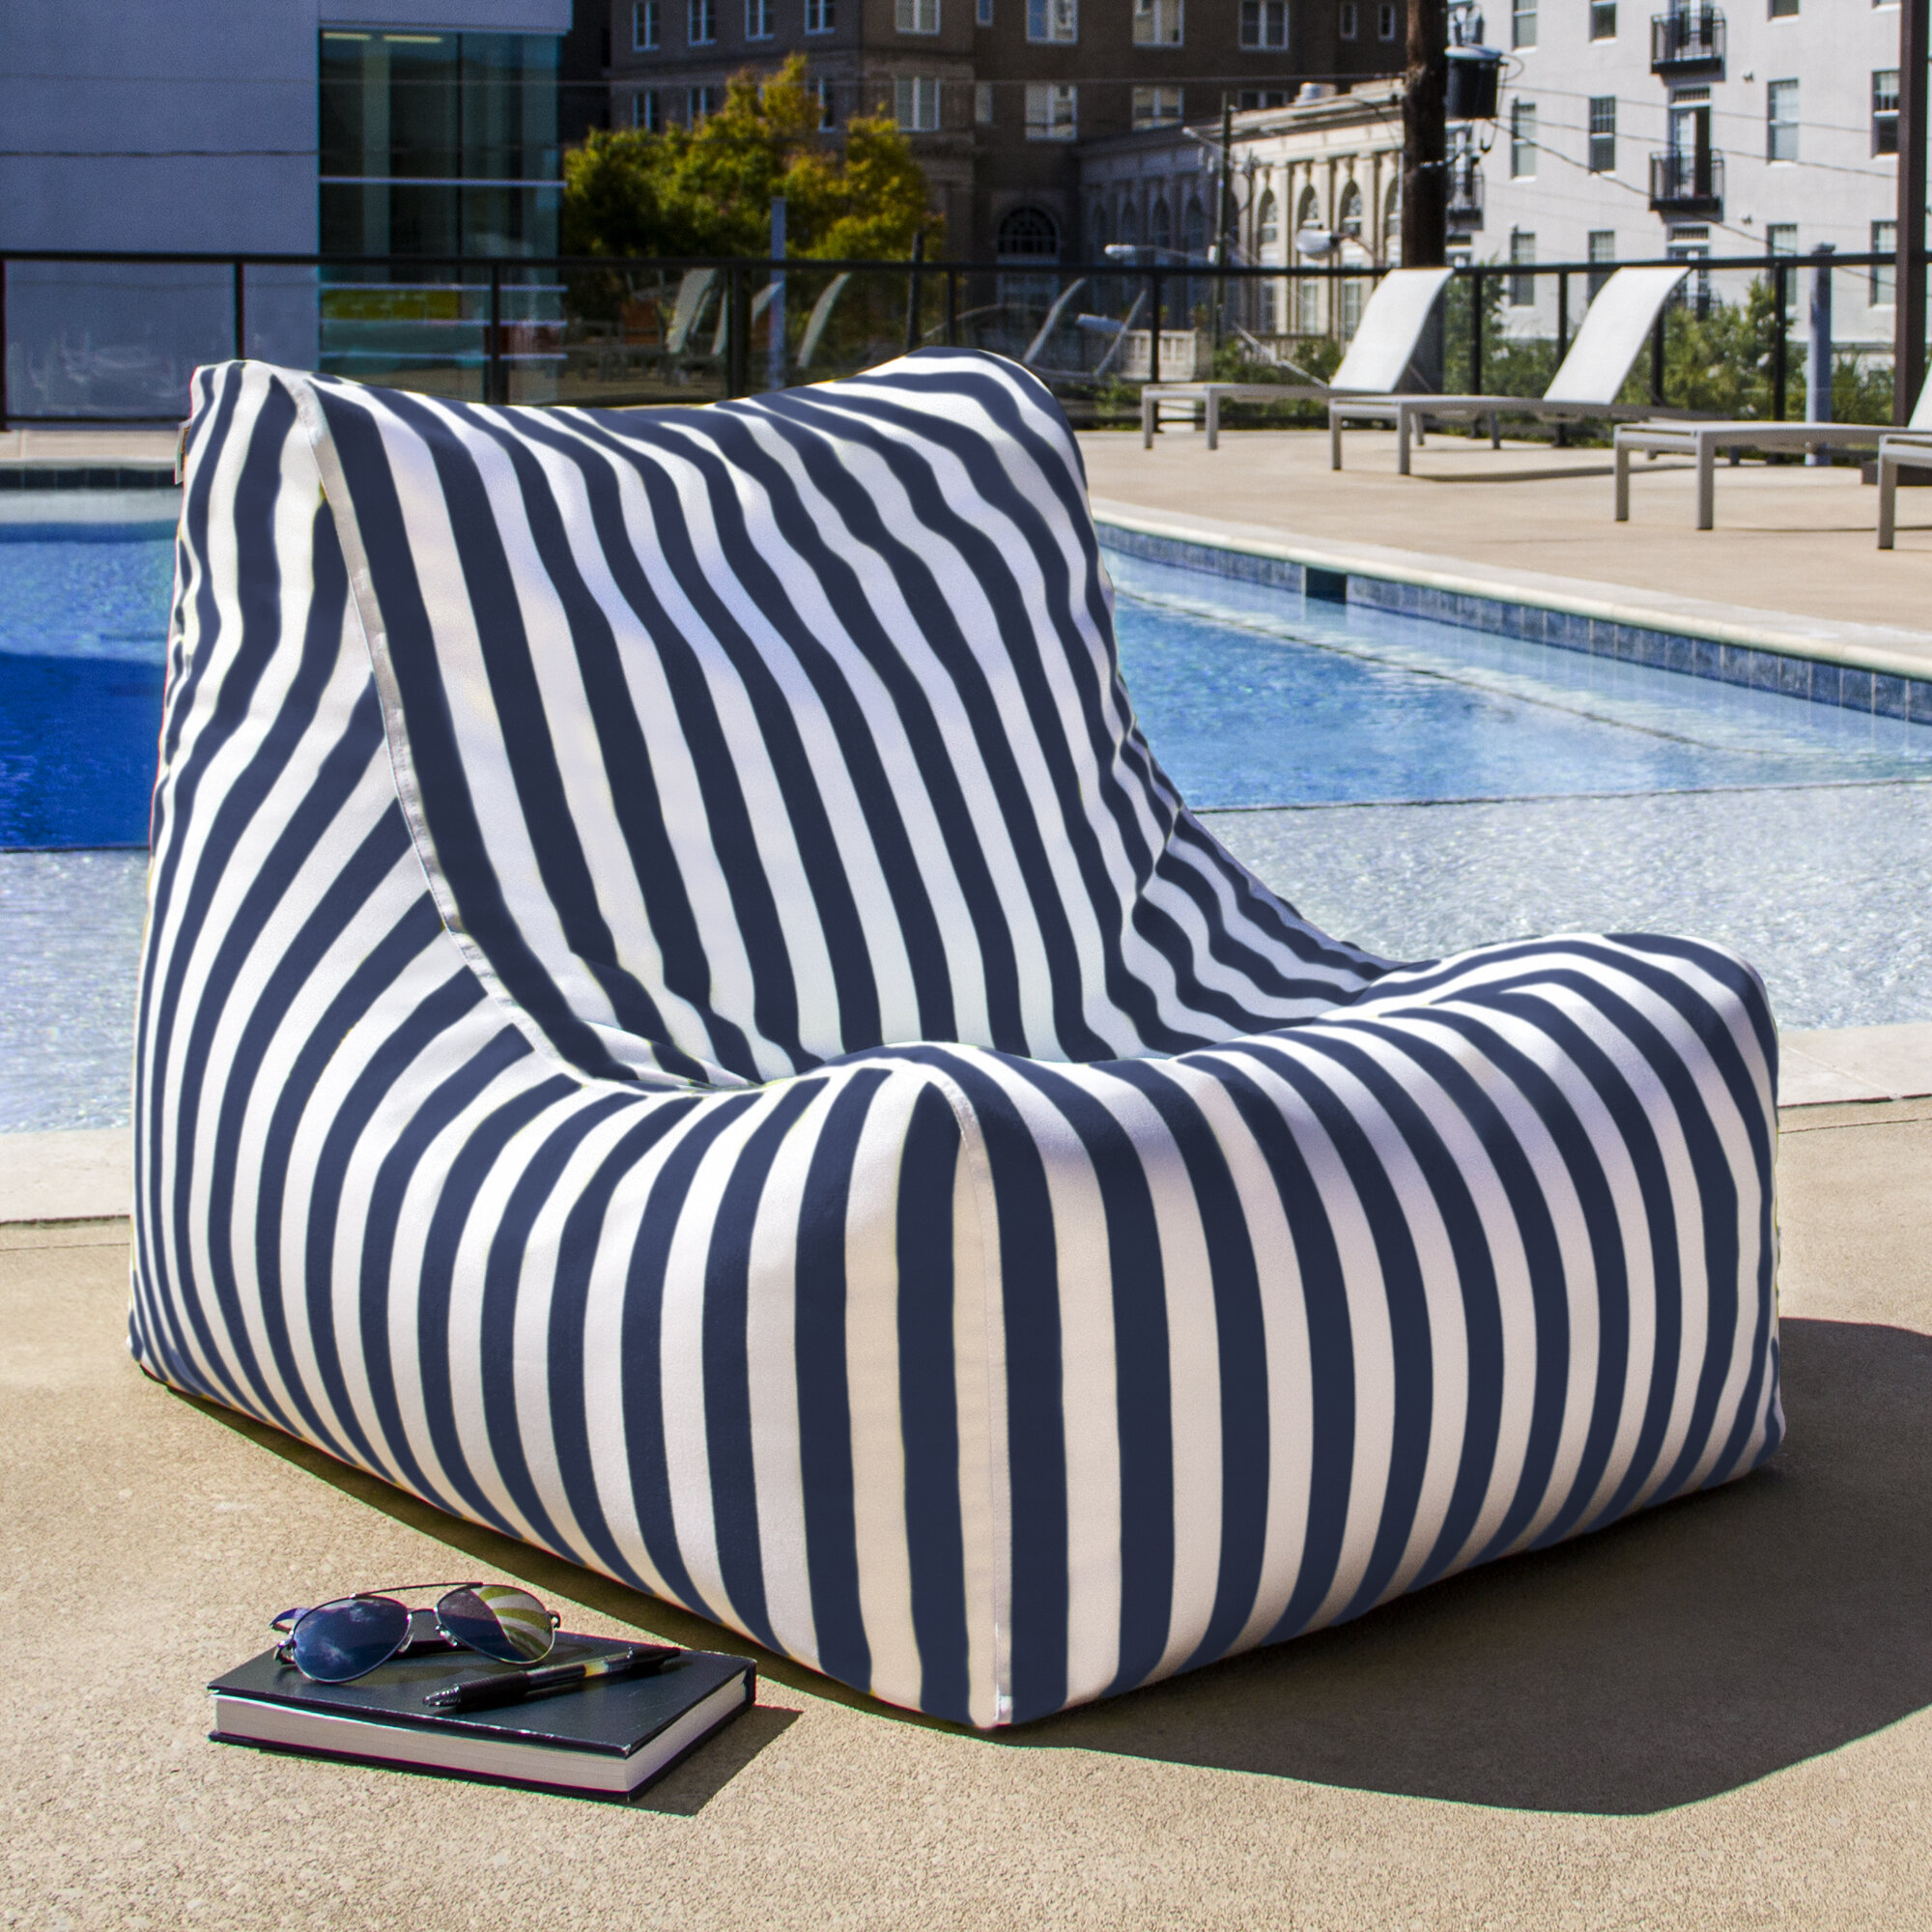 Ponce Outdoor Small Bean Bag Chair & Lounger